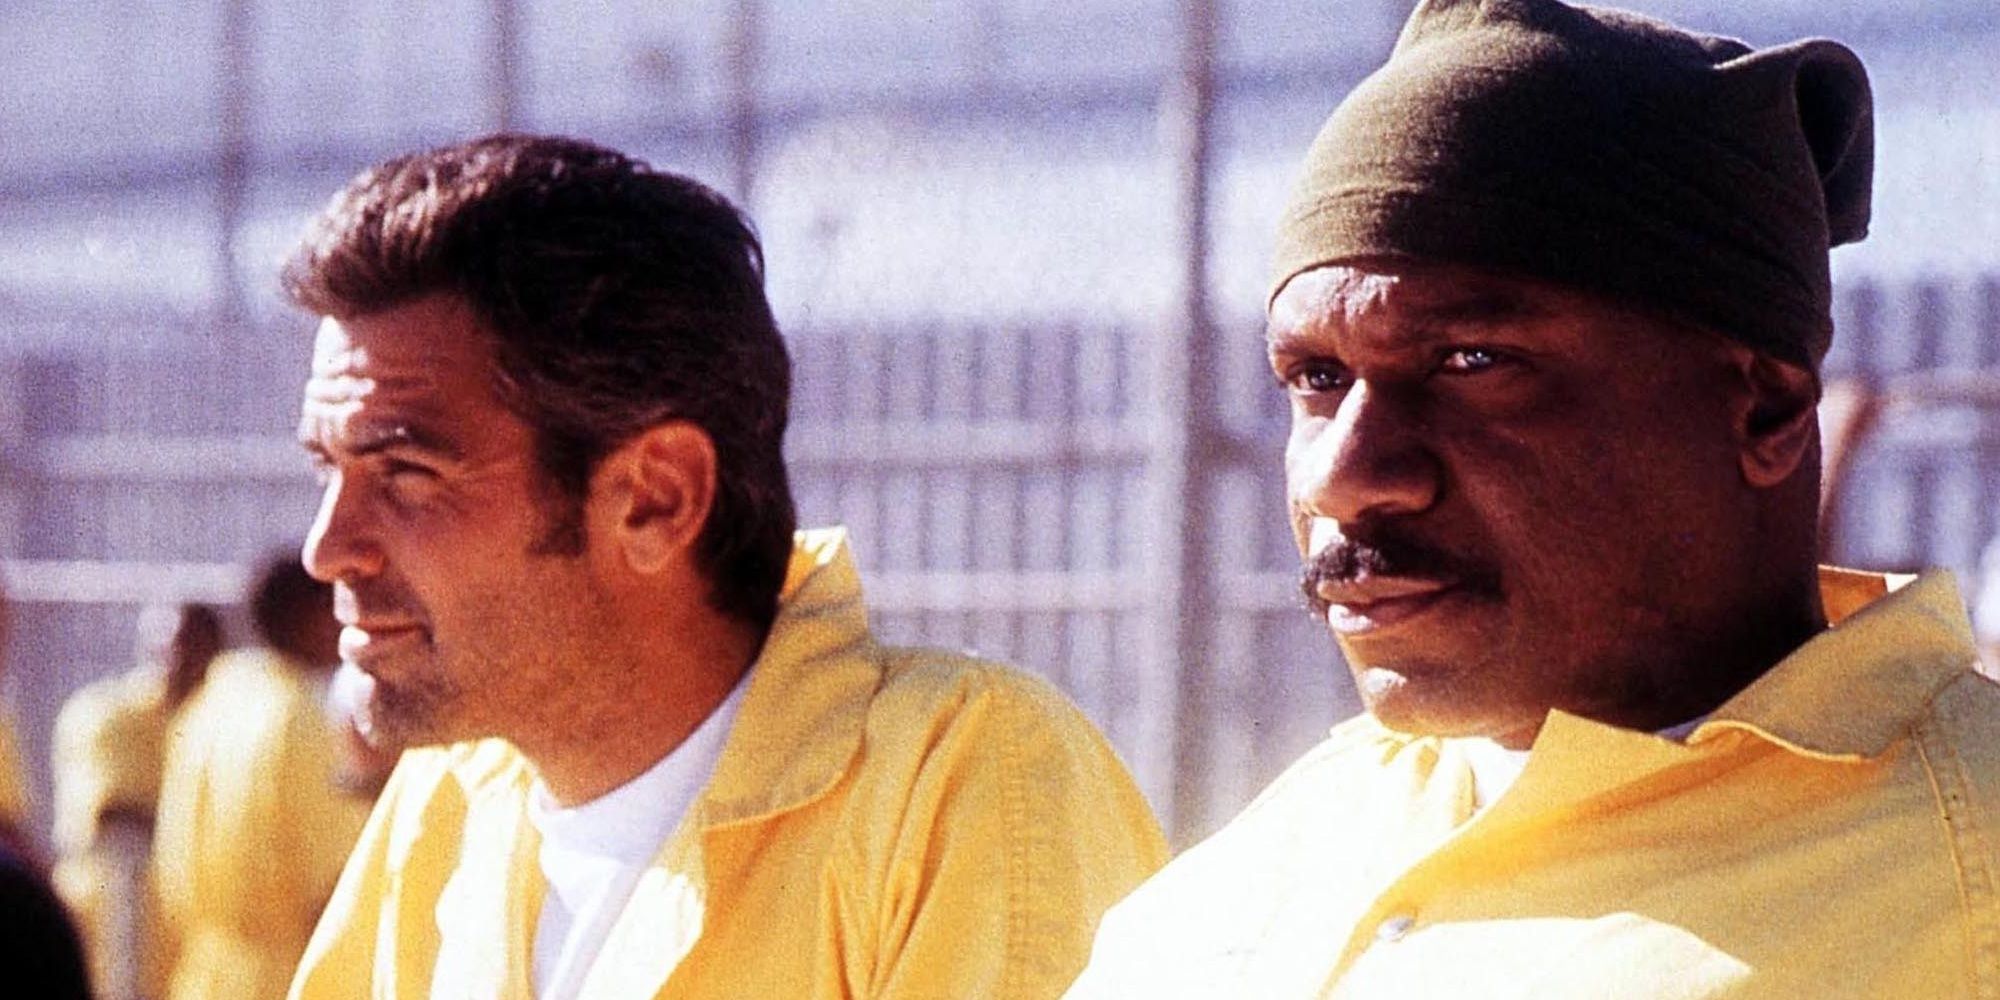 George Clooney and Ving Rhames in Jail in Out of Sight